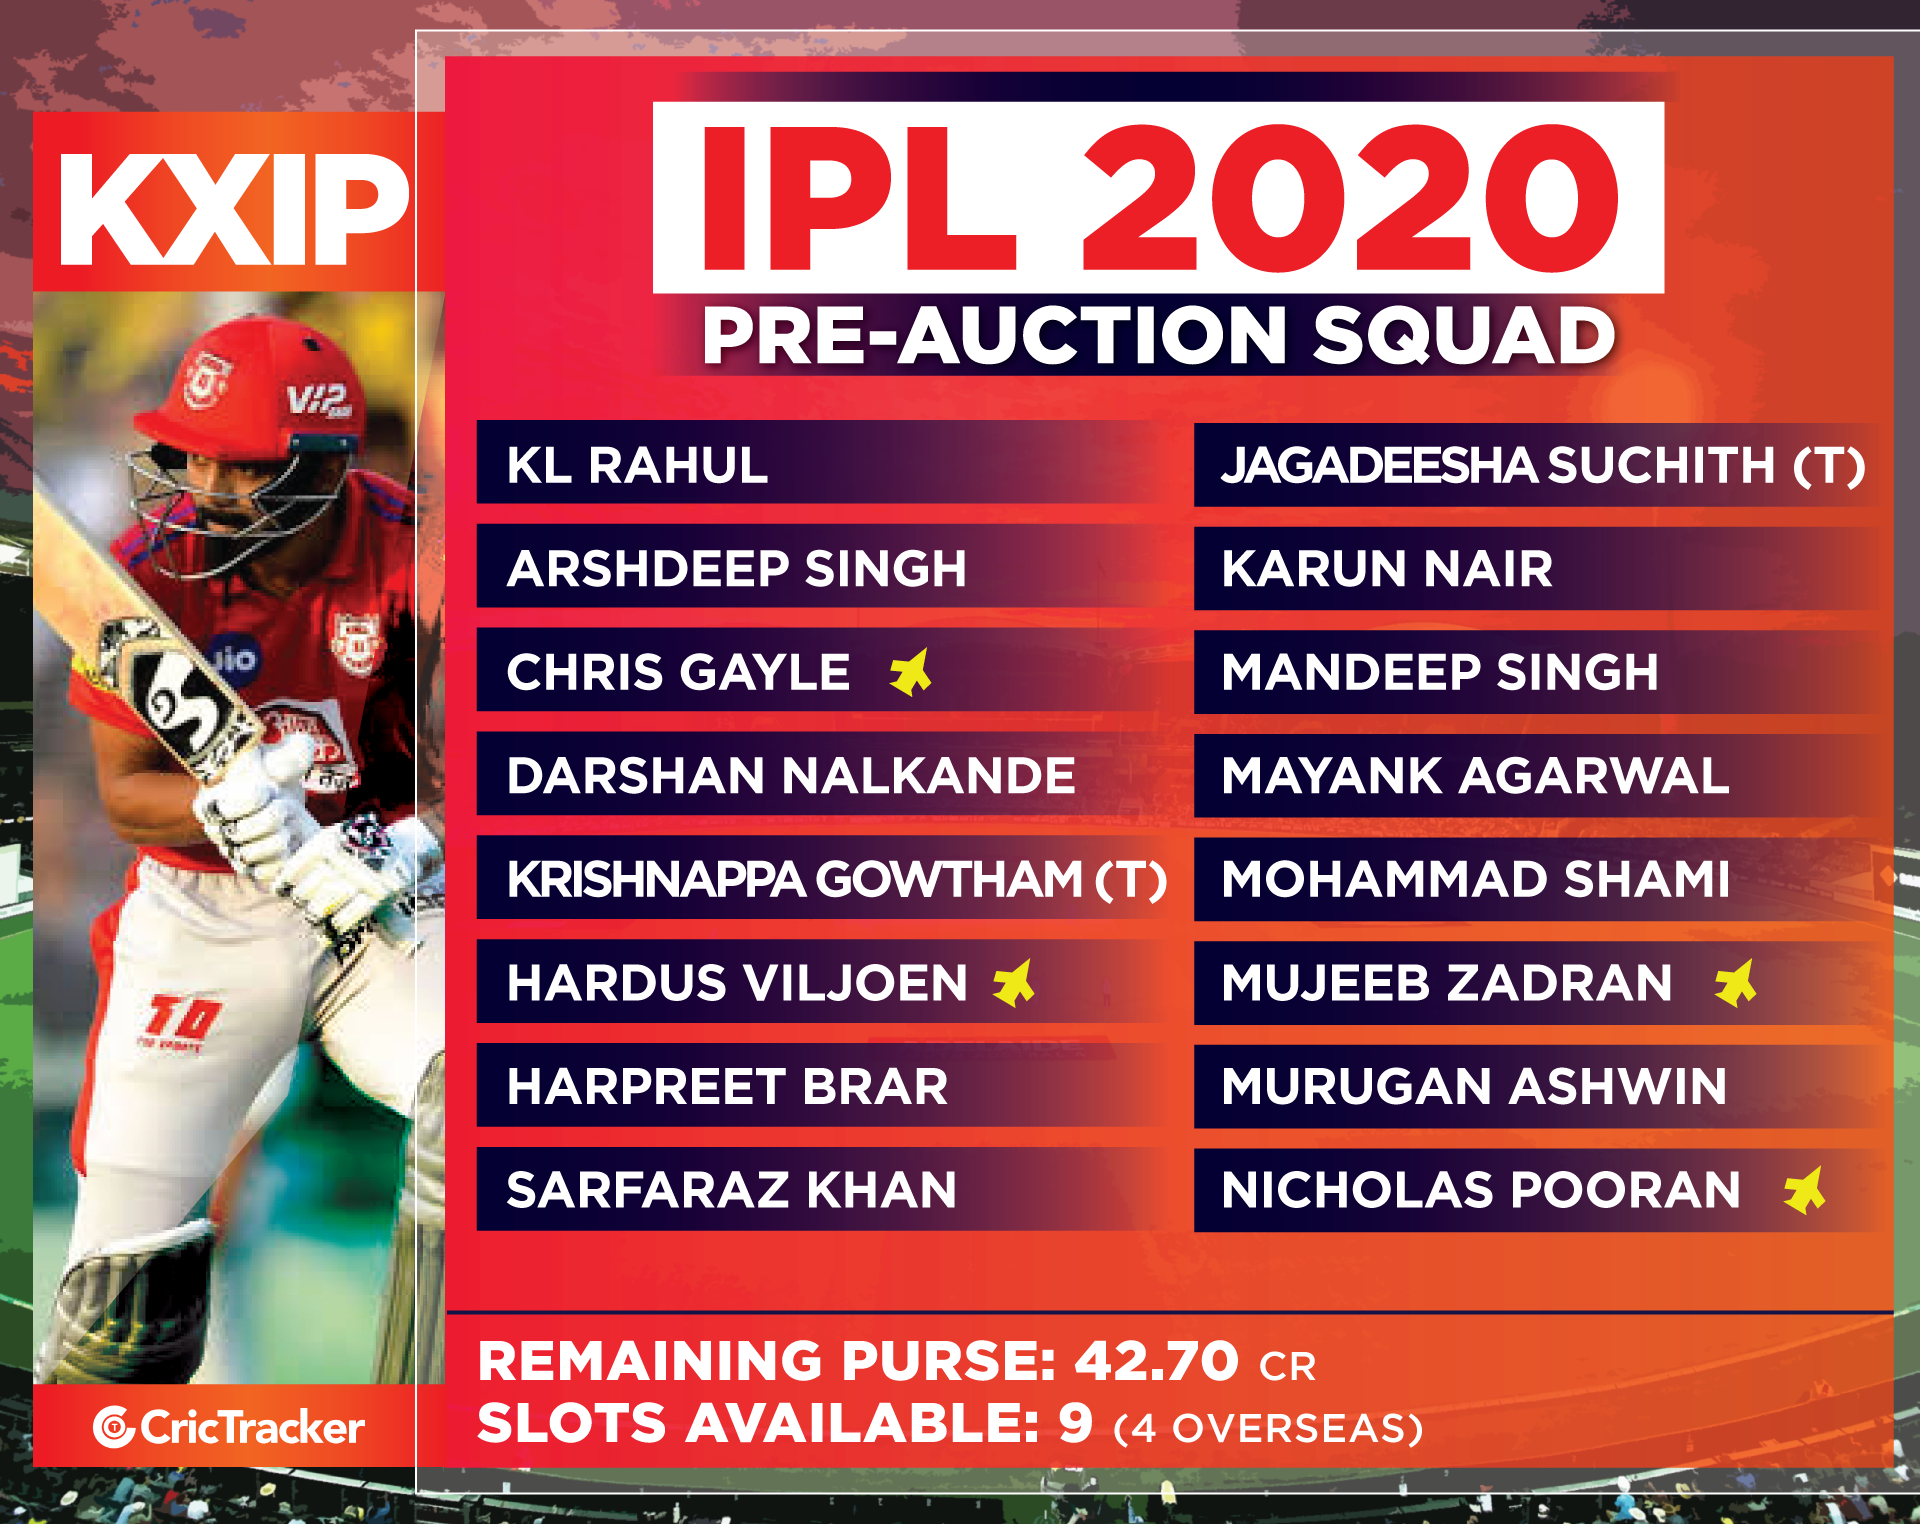 IPL Auction 2024: All you need to know about historic mini-auction in Dubai  on December 19 - India Today